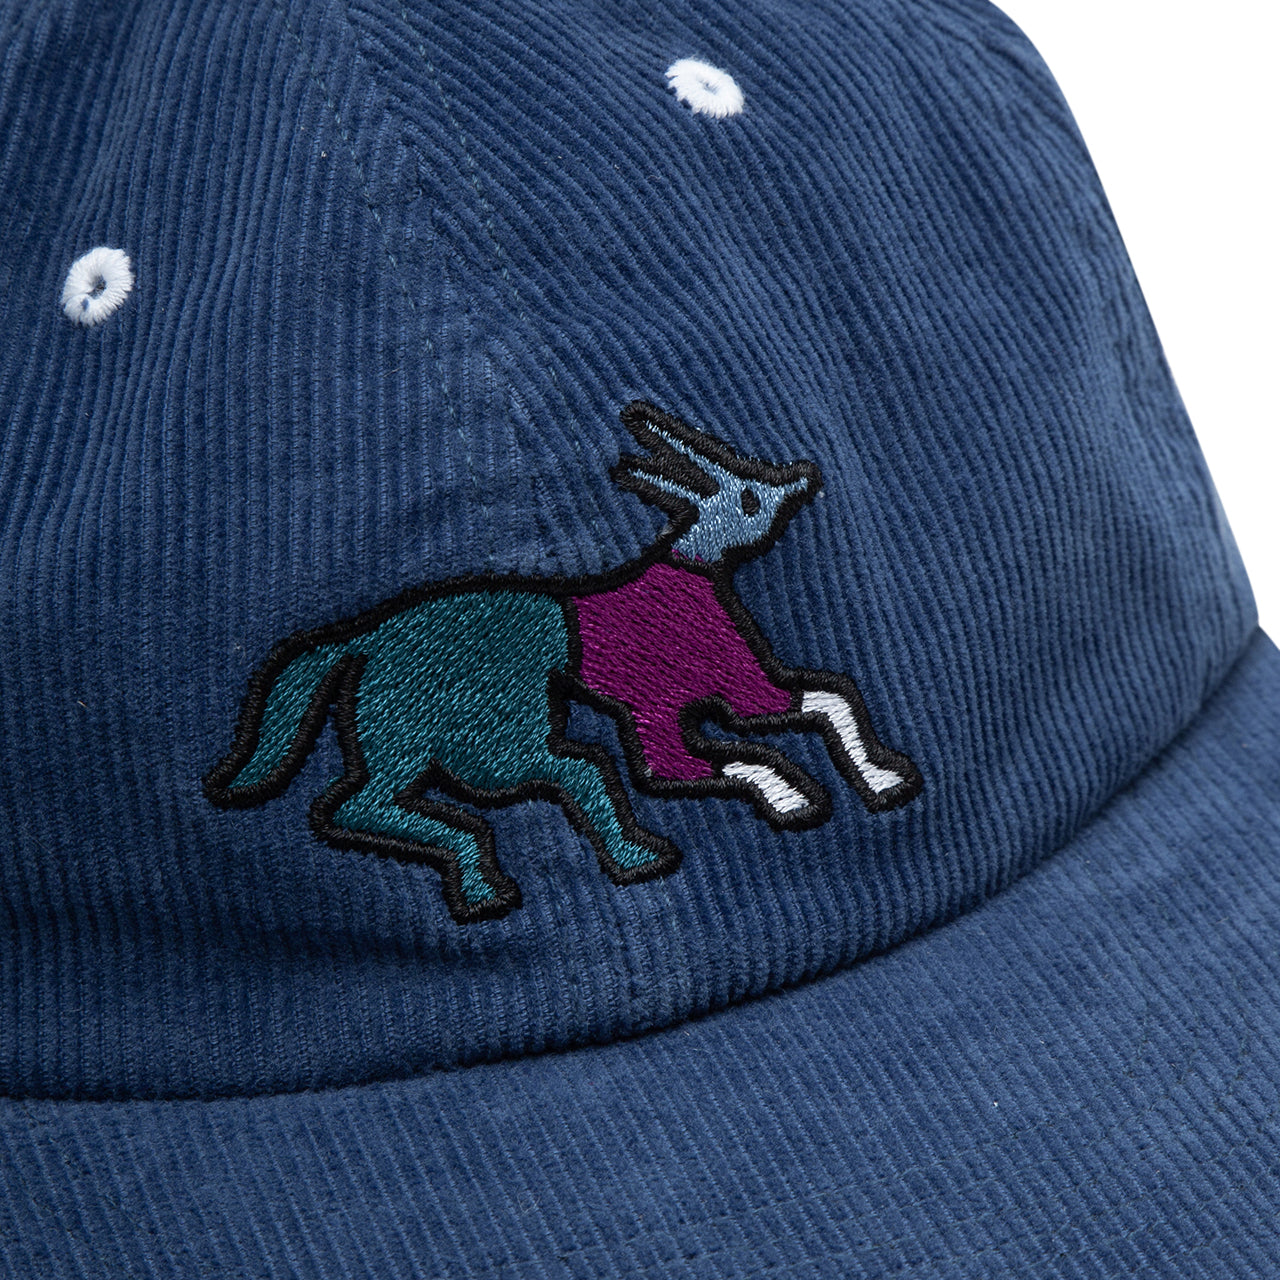 by Parra Anxious Dog 6 Panel Hat (Blau)  - Allike Store